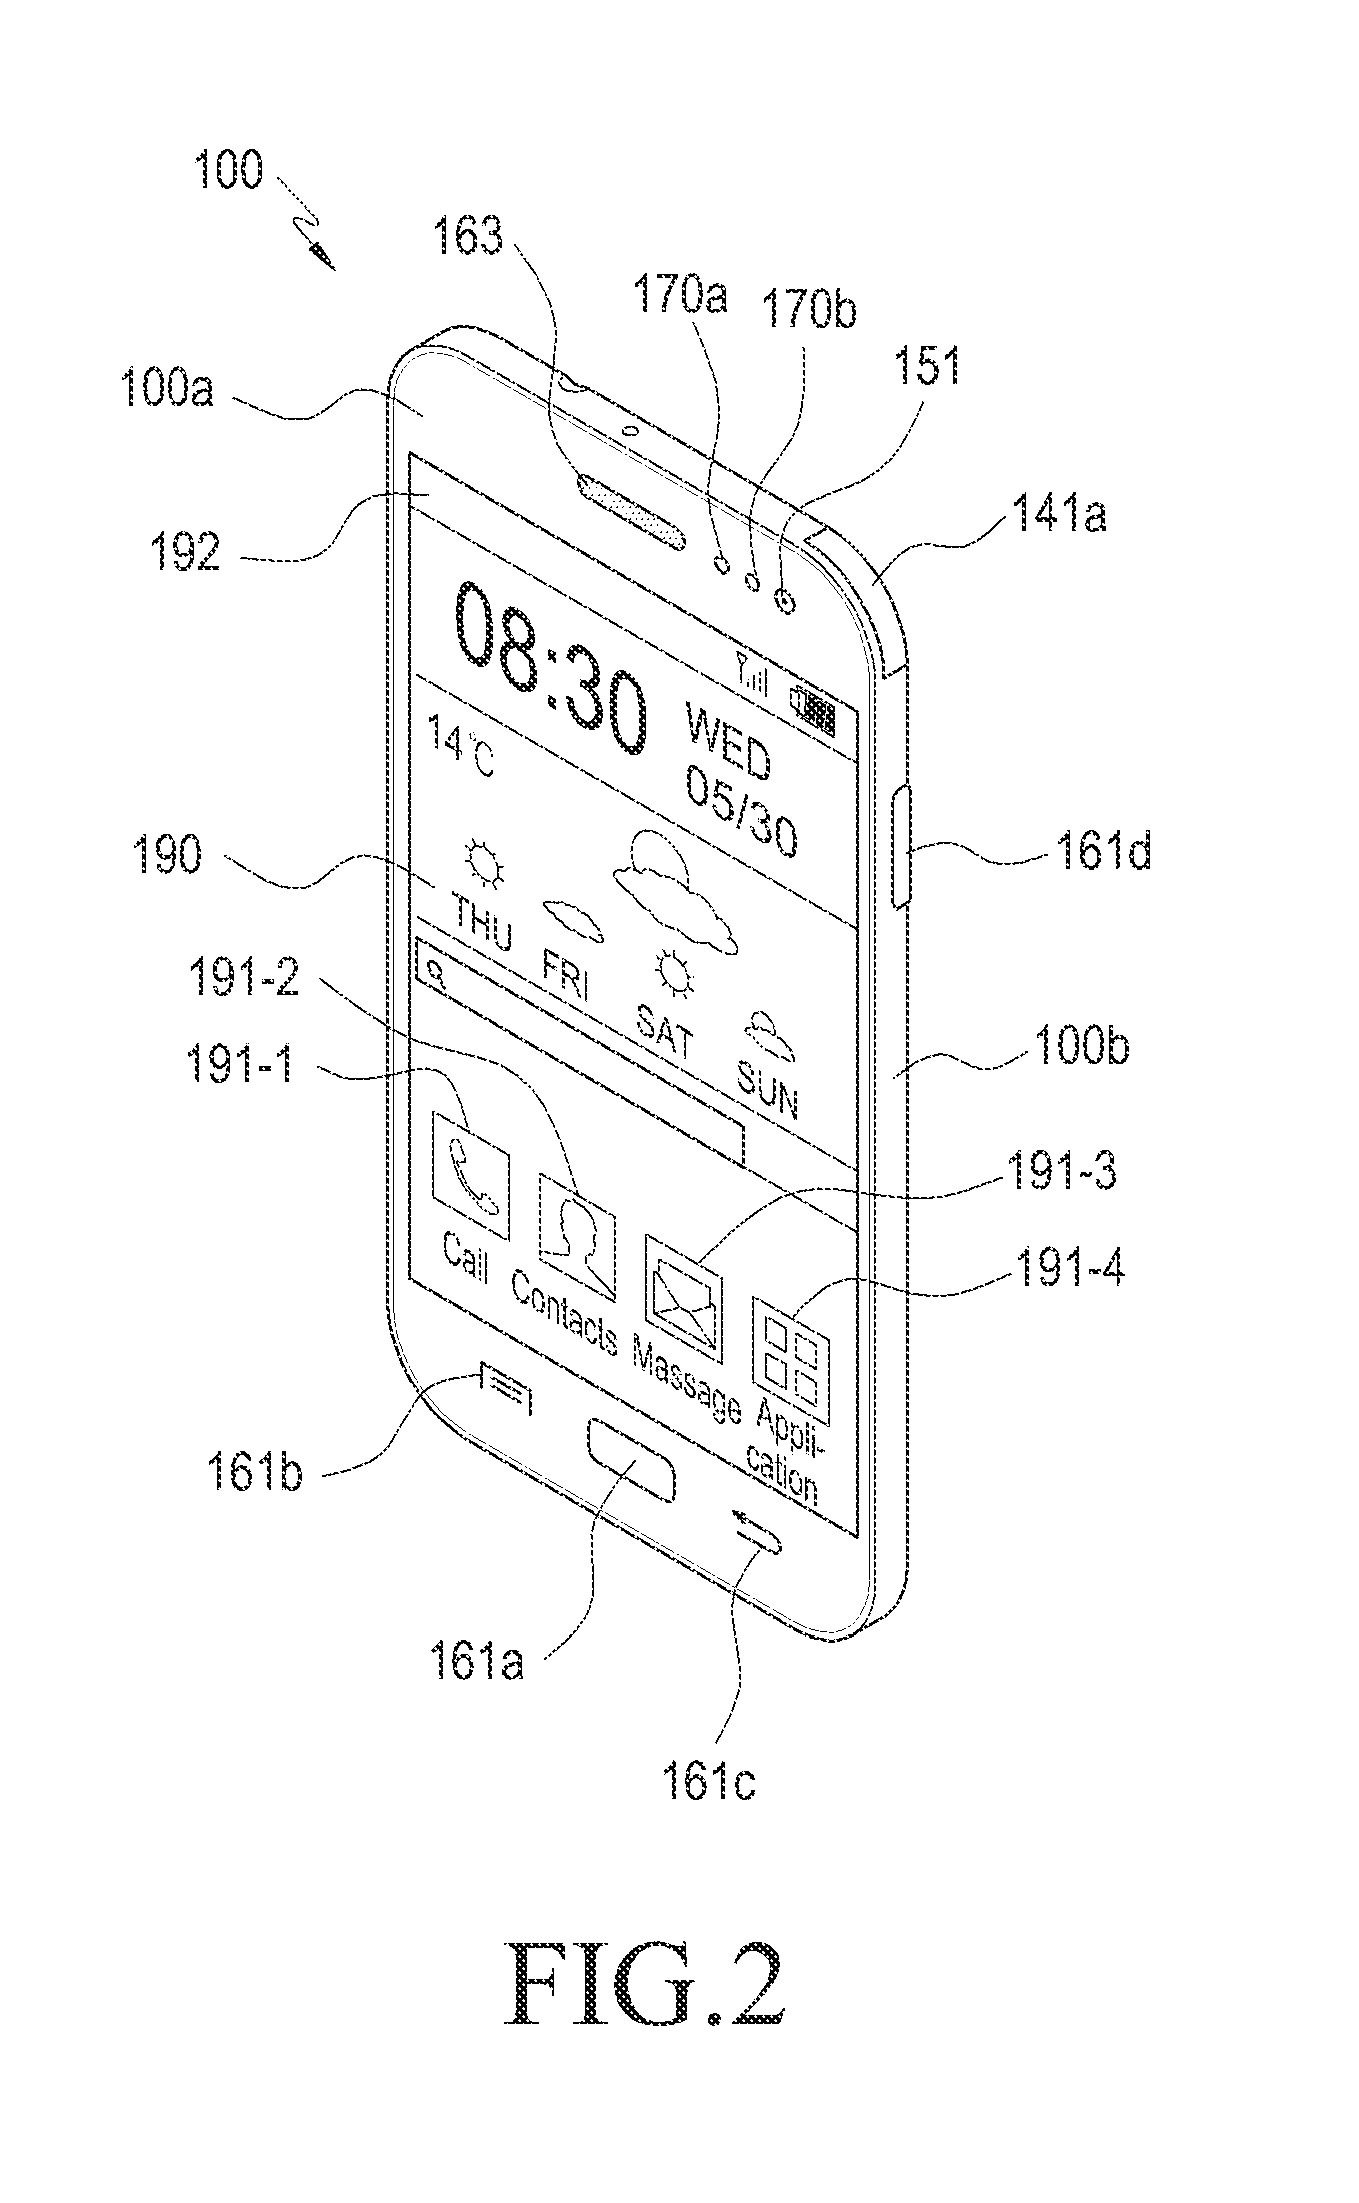 Mobile device having face recognition function using additional component and method for controlling the mobile device